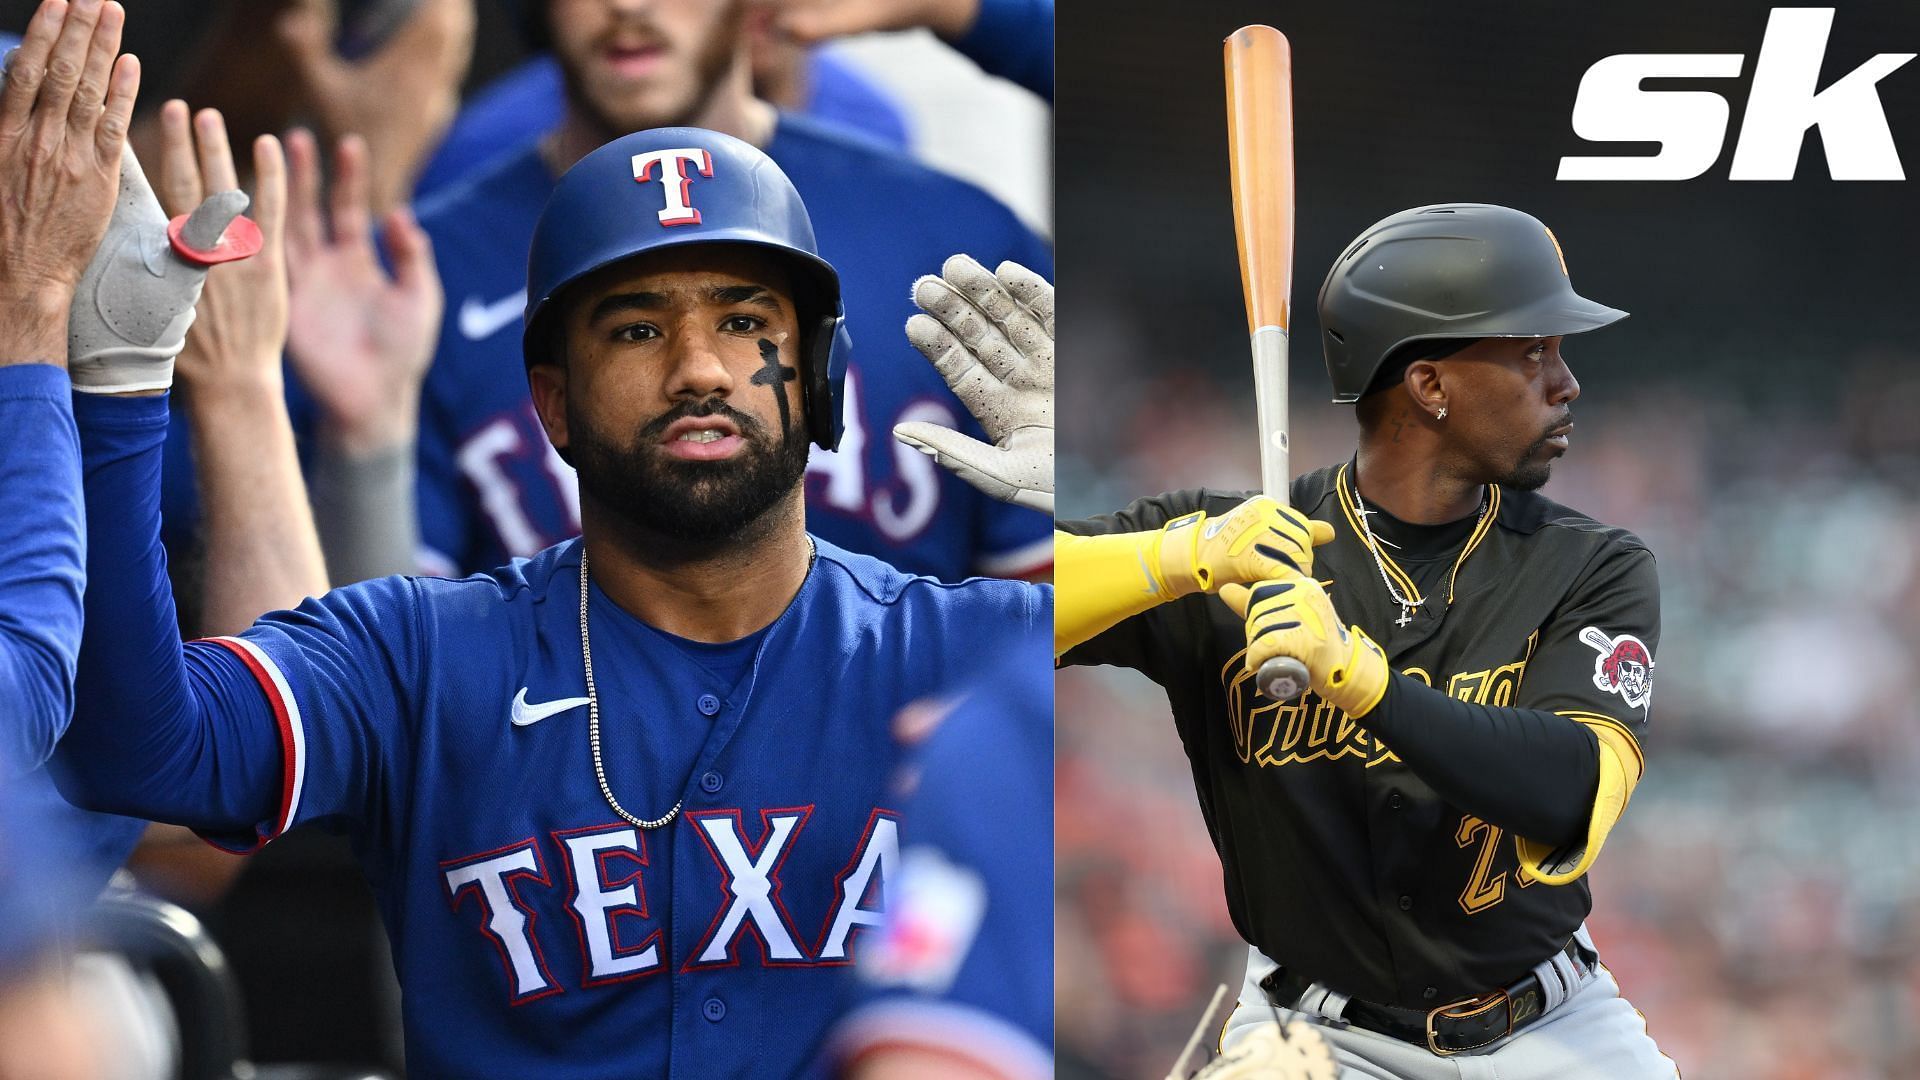 An MLB analyst has linked an Andrew McCutchen trade rumor to the Texas Rangers